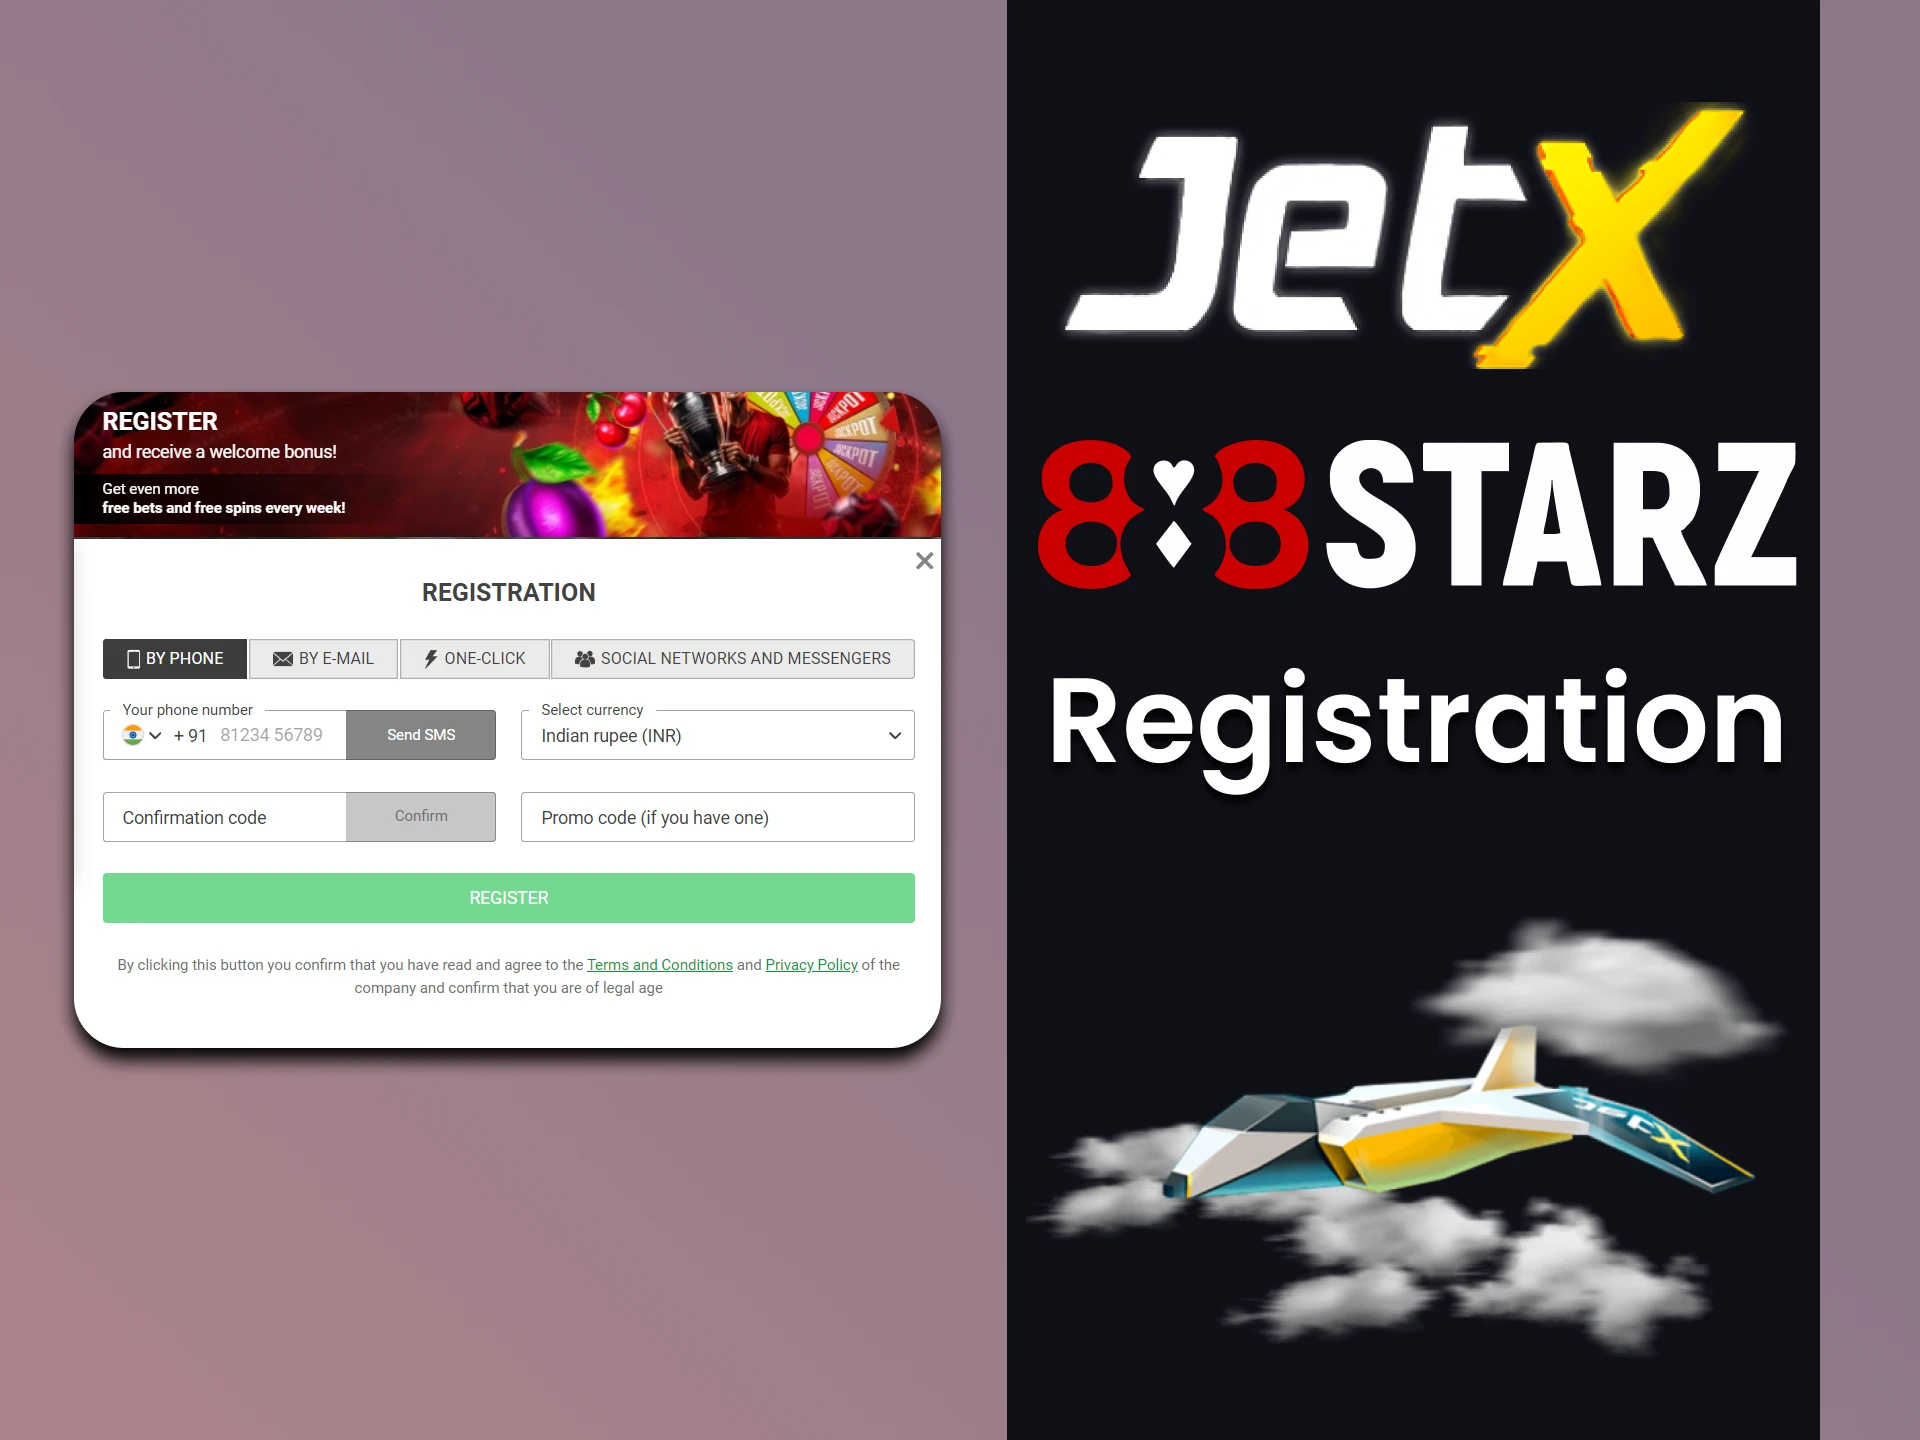 By registering with 888starz you will be able to play JetX.